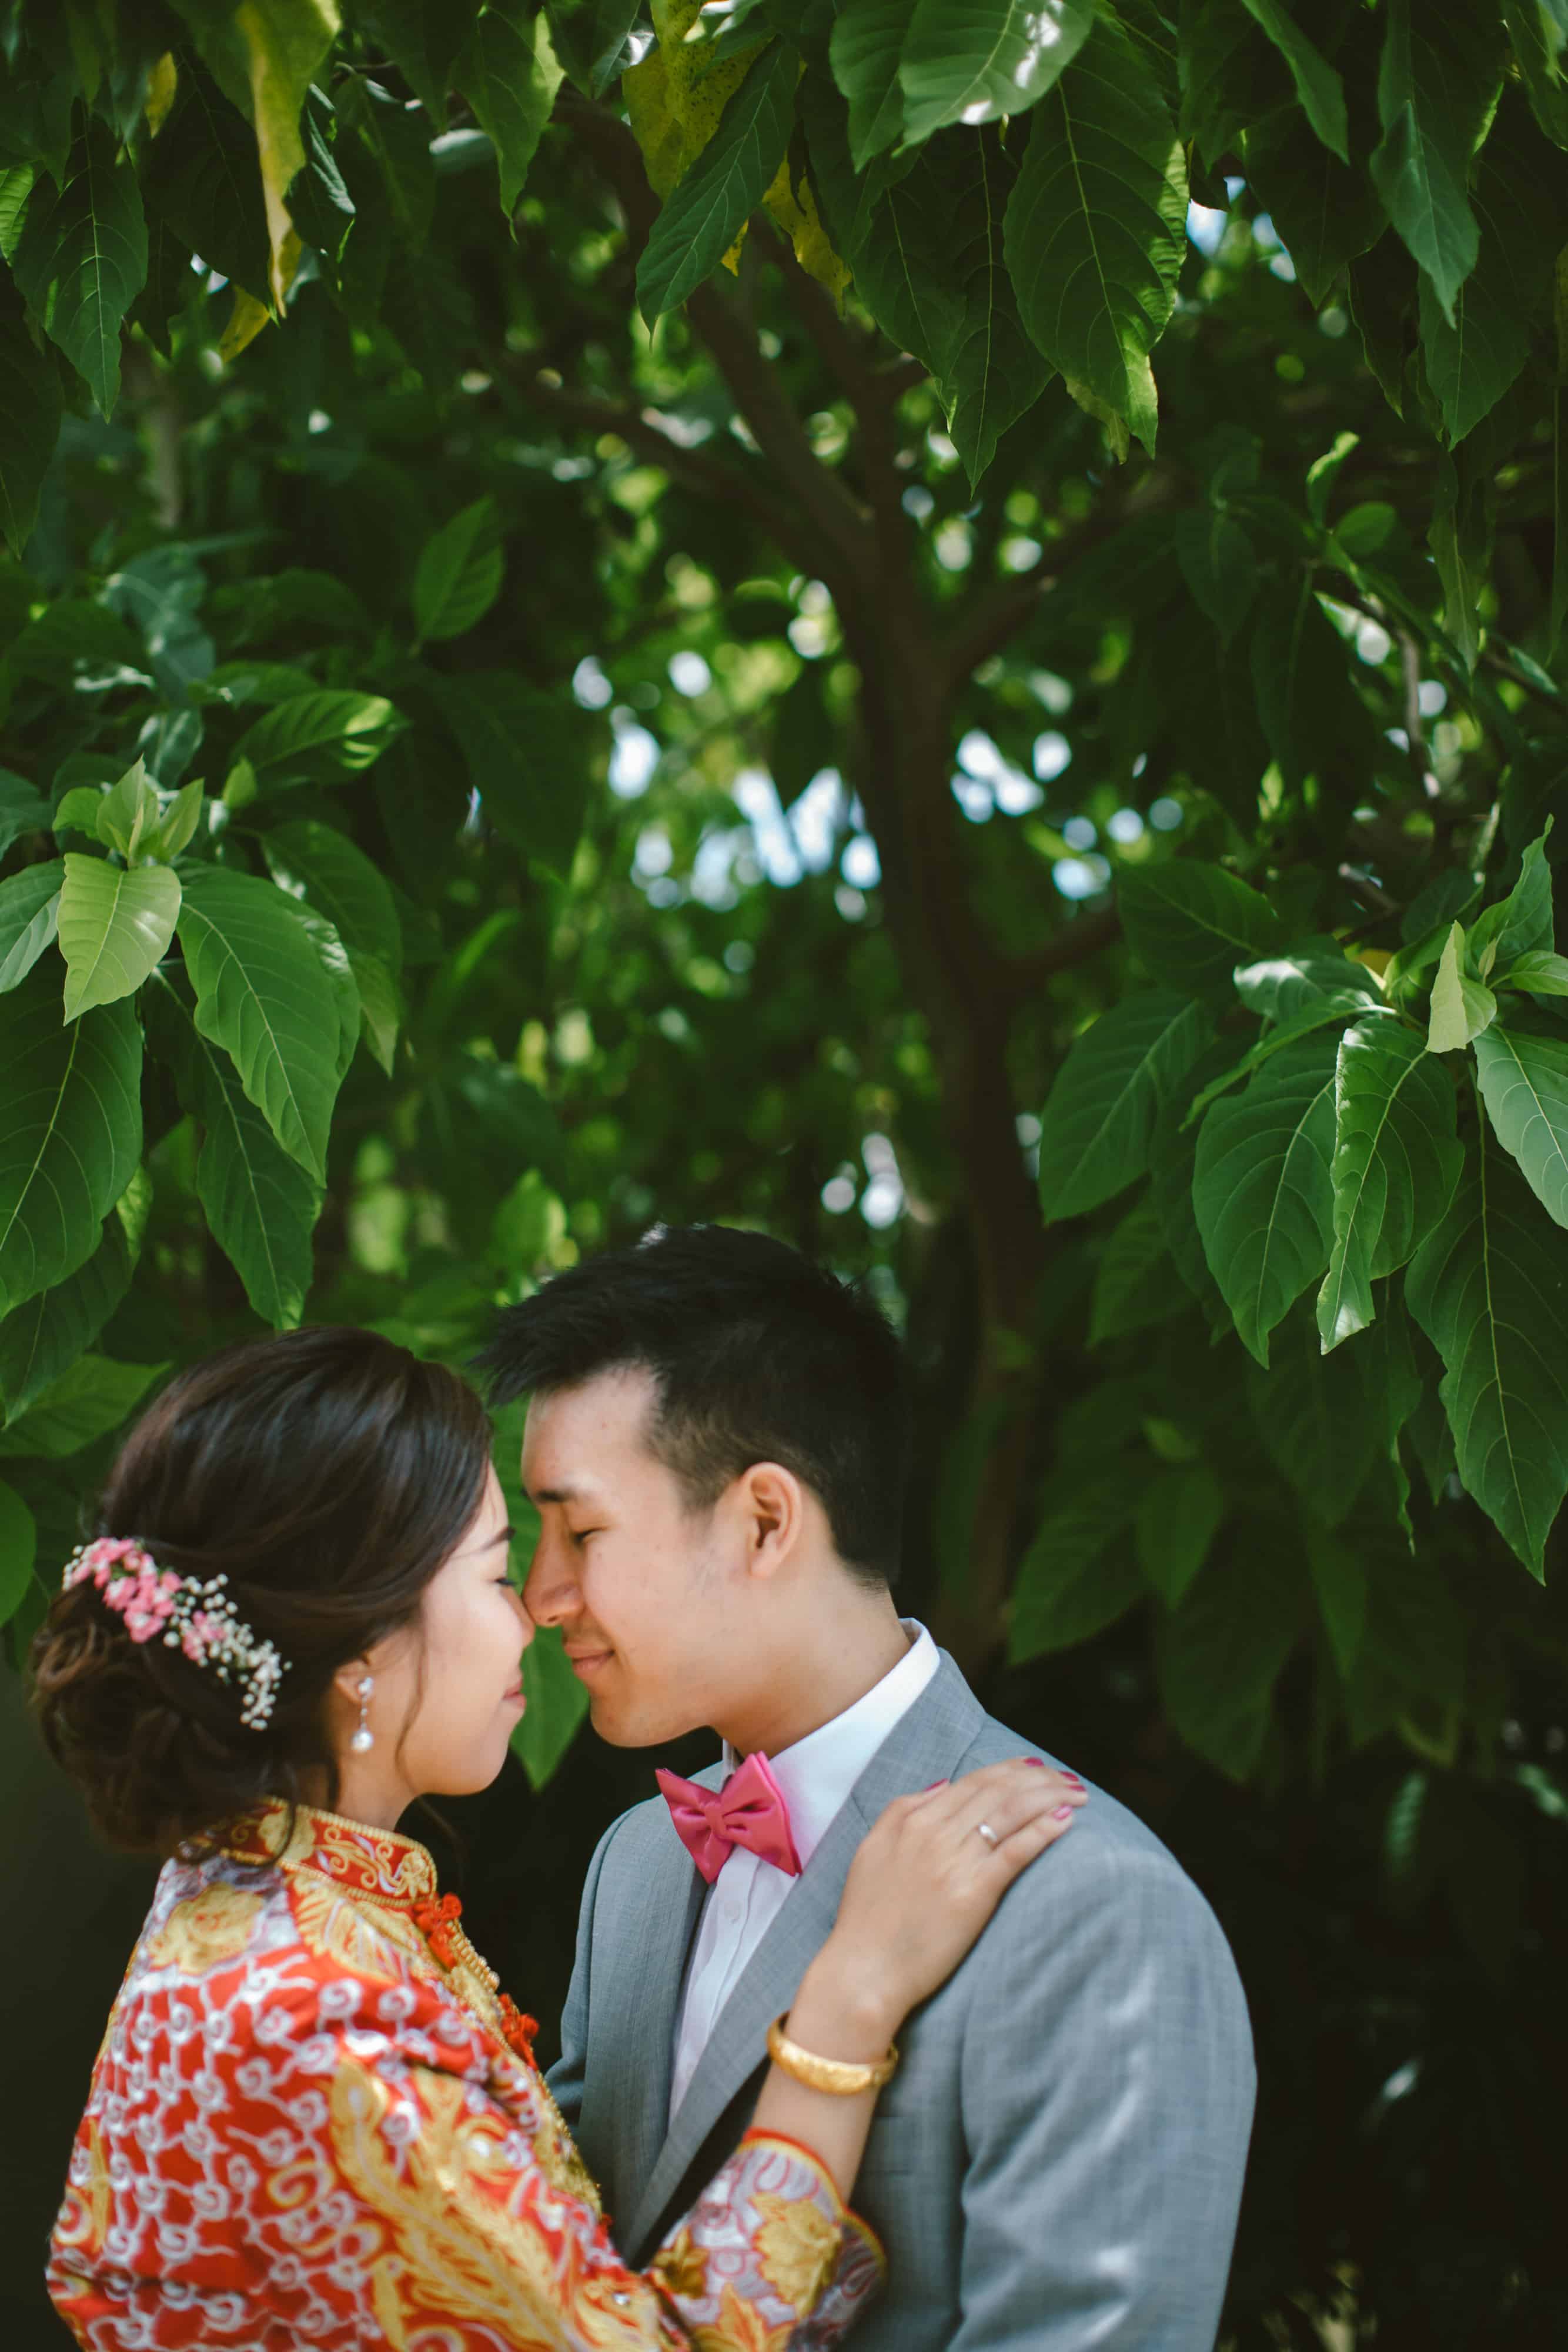 Kevin Tan Cliff Choong The Cross Effects Malaysia Destination Wedding Photographers Kuala Lumpur Actual Day in Petaling Jaya Malaysia Destination Wedding Photographer Cliff Choong Photography Chinese Tea Ceremony Couple Portrait